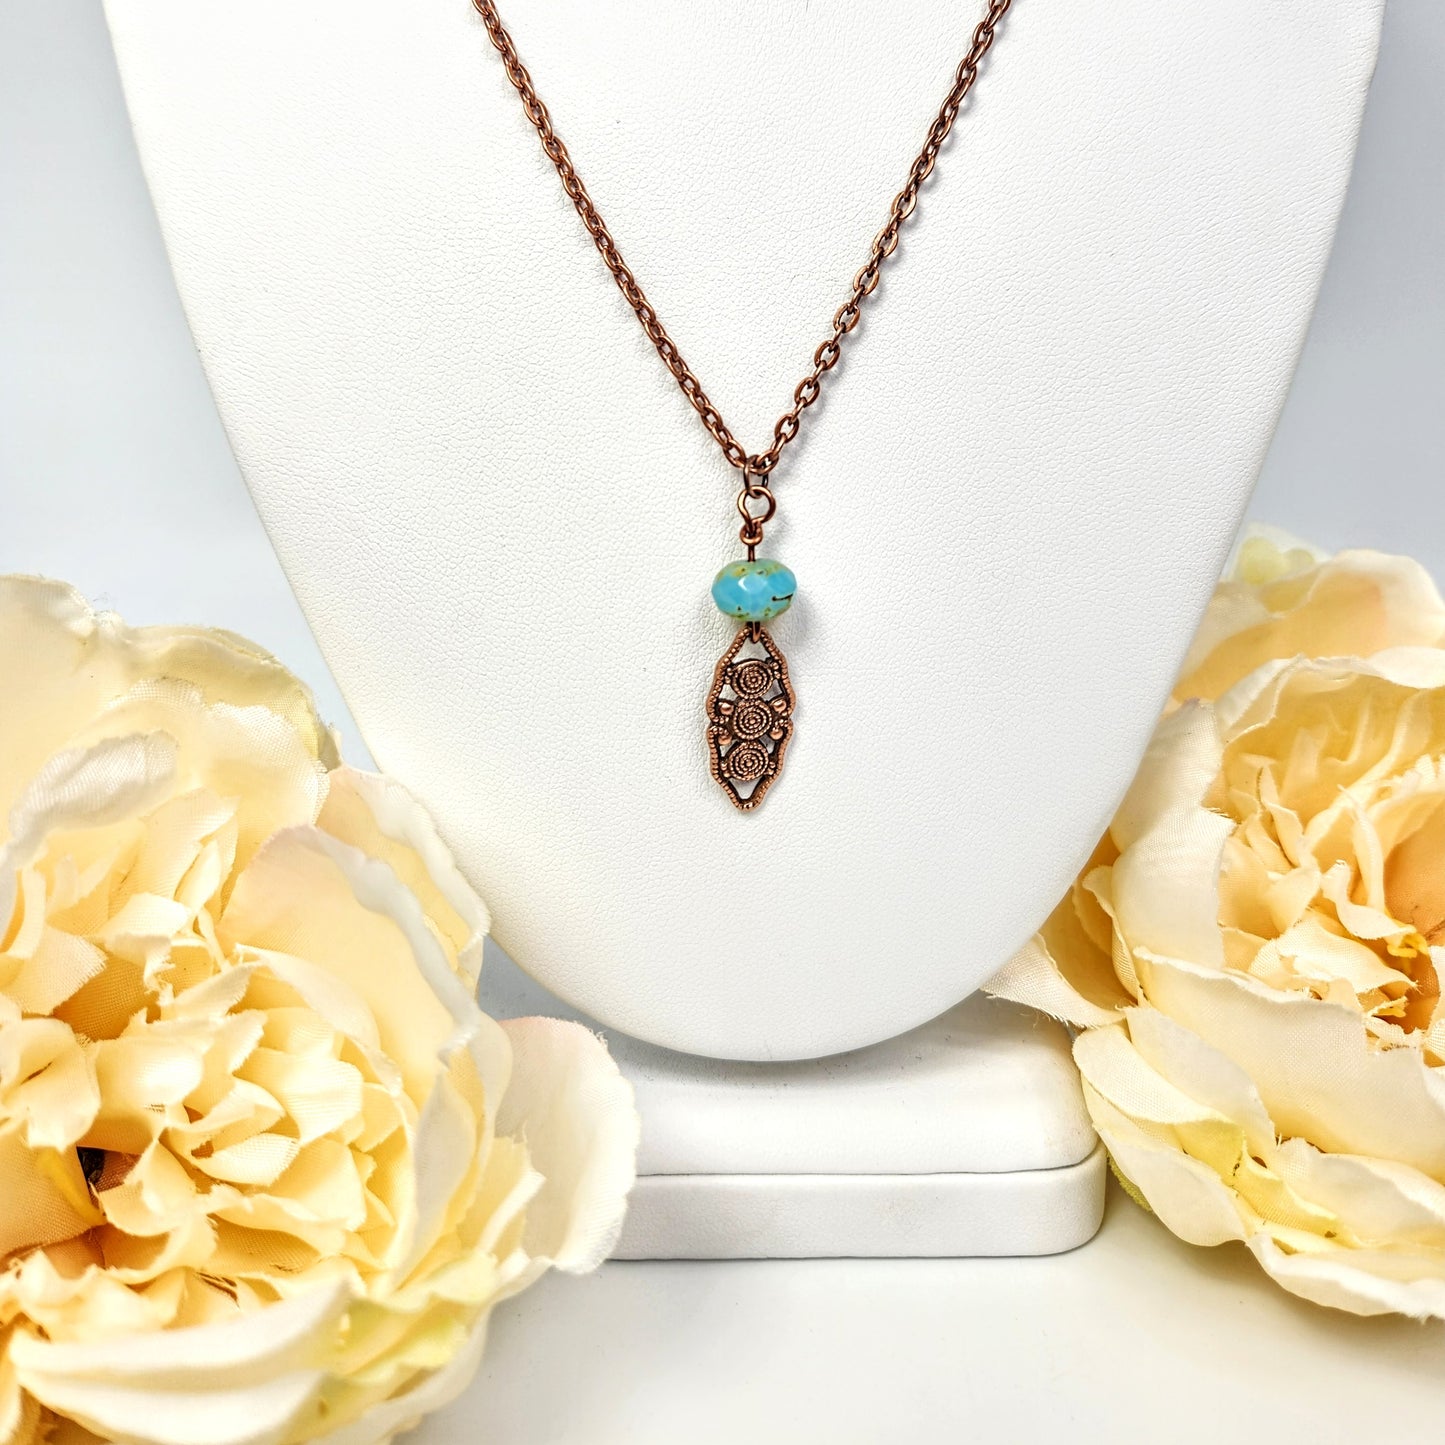 Copper Tone Oval + Blue Necklace